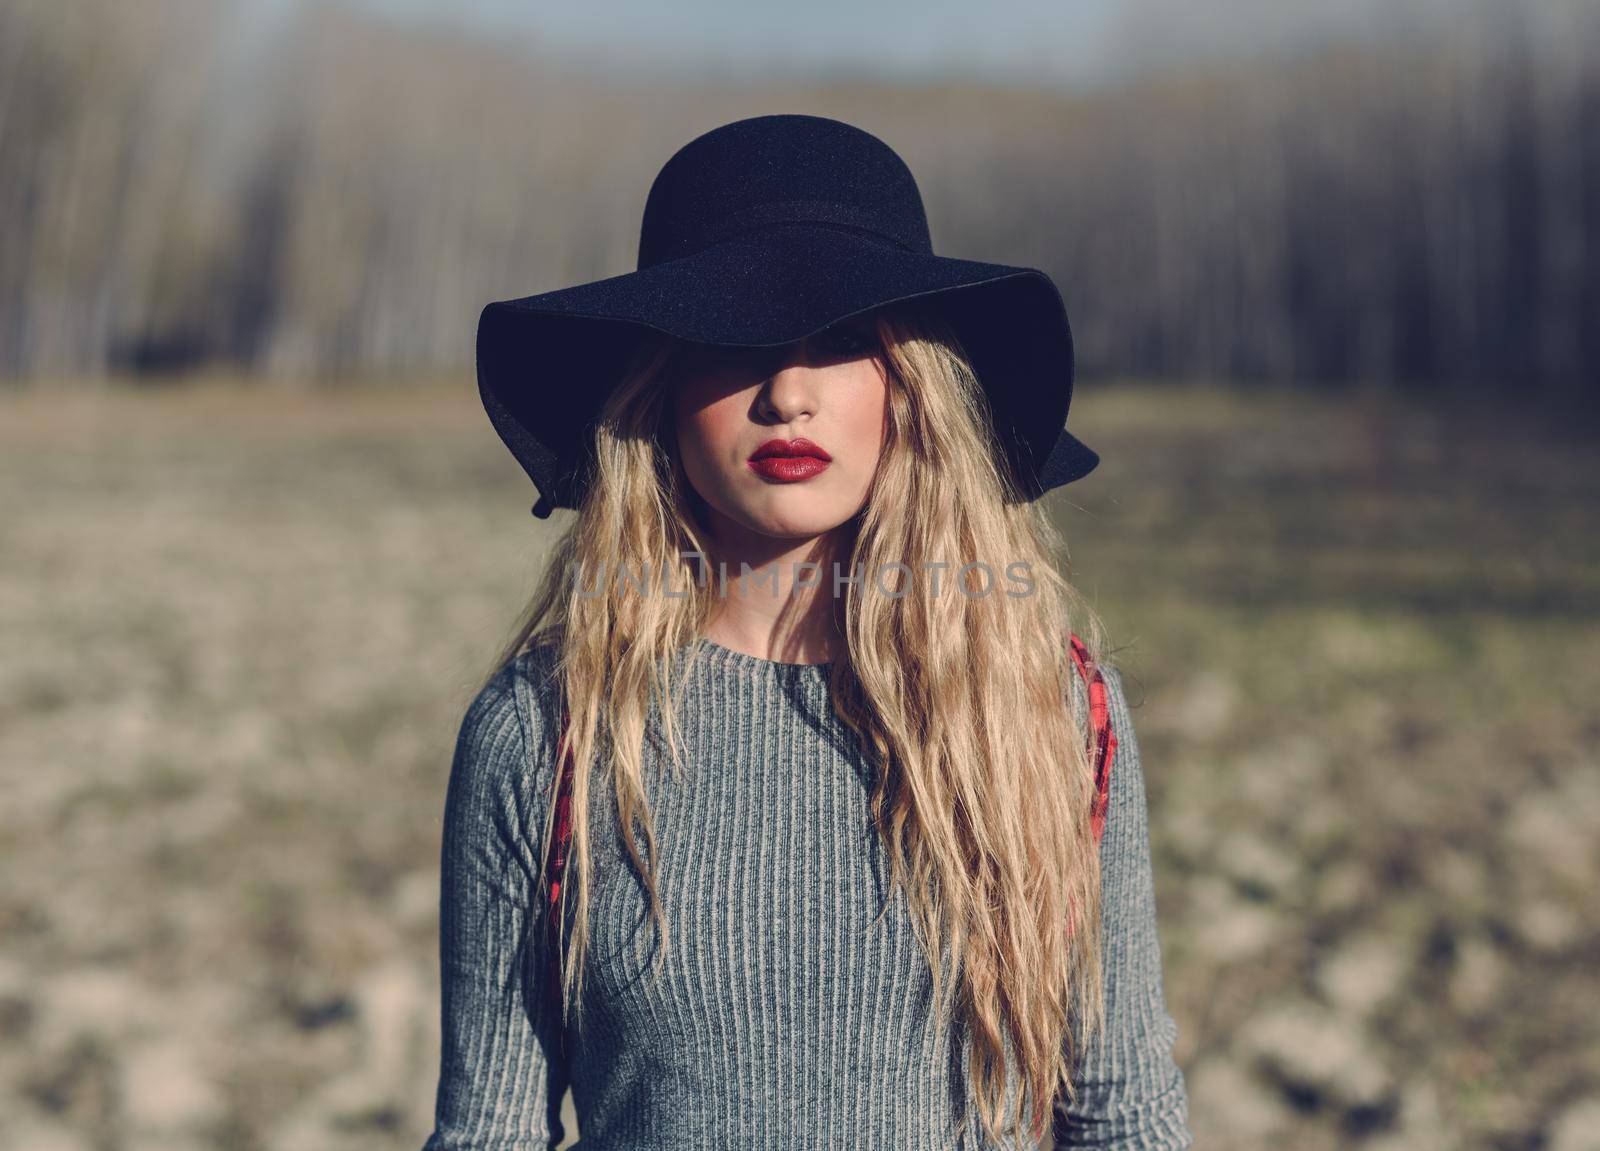 Beautiful young blonde woman, model of fashion, in rural background. Girl wearing sweater, skirt and hat.